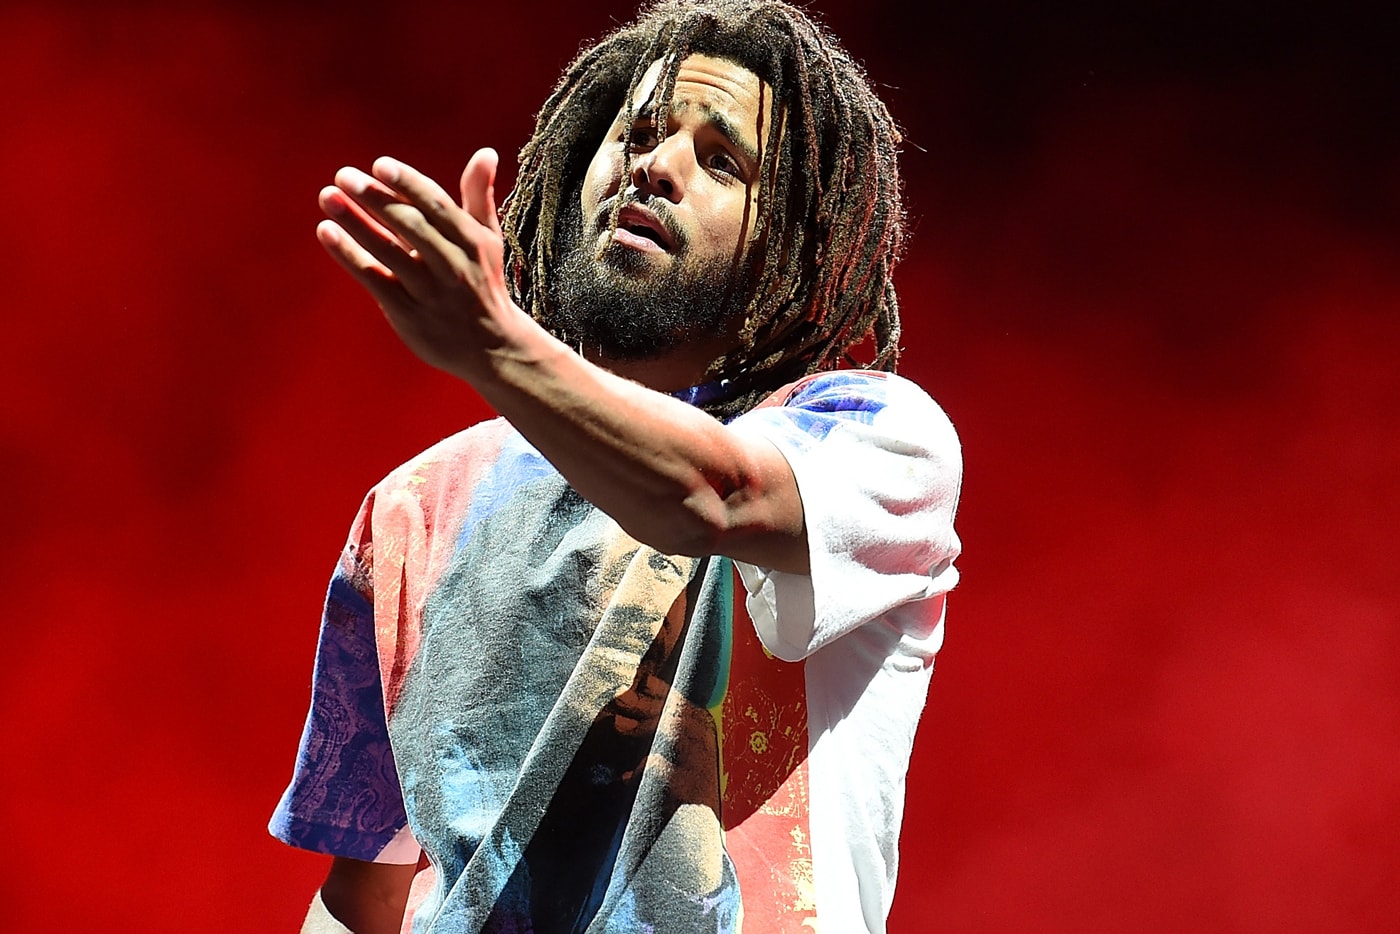 J. Cole Teases 'The Fall Off' At Day N Vegas Festival political ad satire hip-hop rap sixth studio album 'kod' lil pump $2,000 usd Vote for The Fall Off in 2020 jermaine cole 